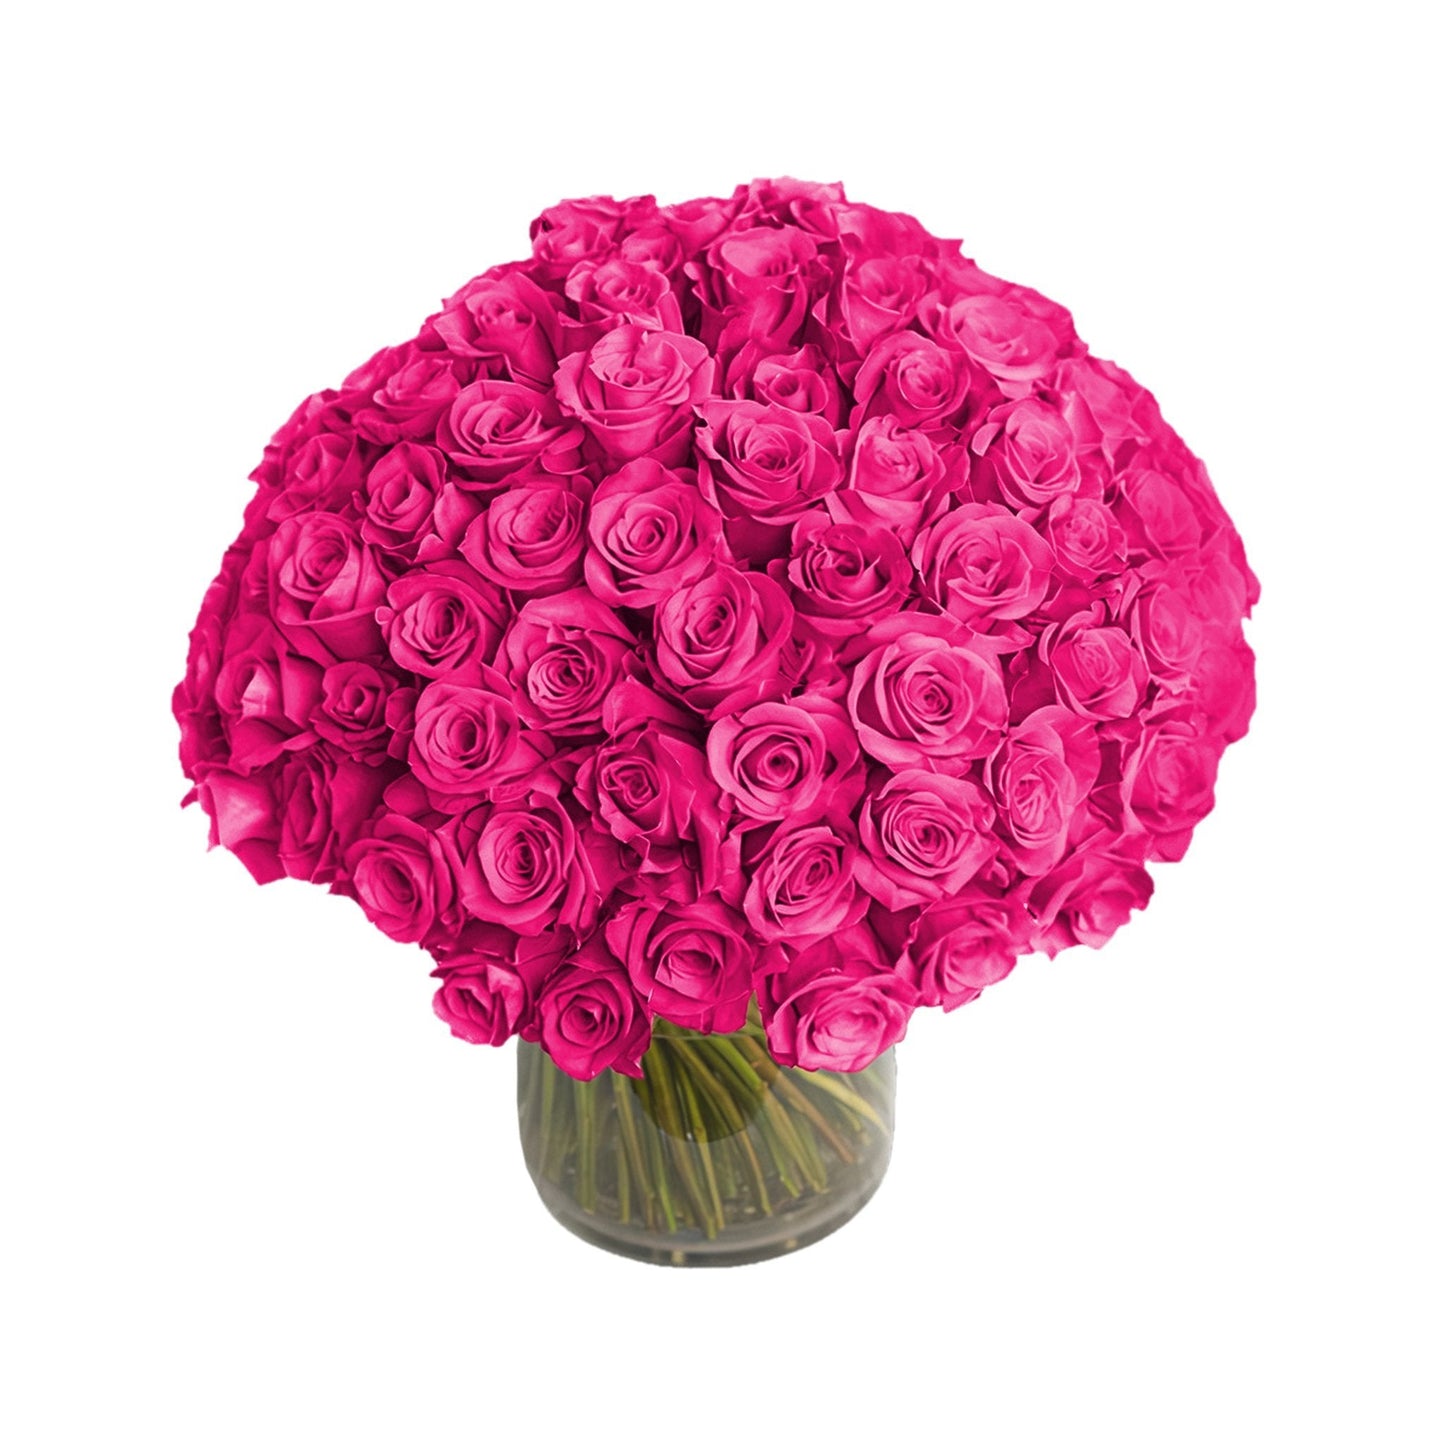 Fresh Roses in a Vase | 100 Hot Pink Roses - Fresh Cut Flowers - Queens Flower Delivery